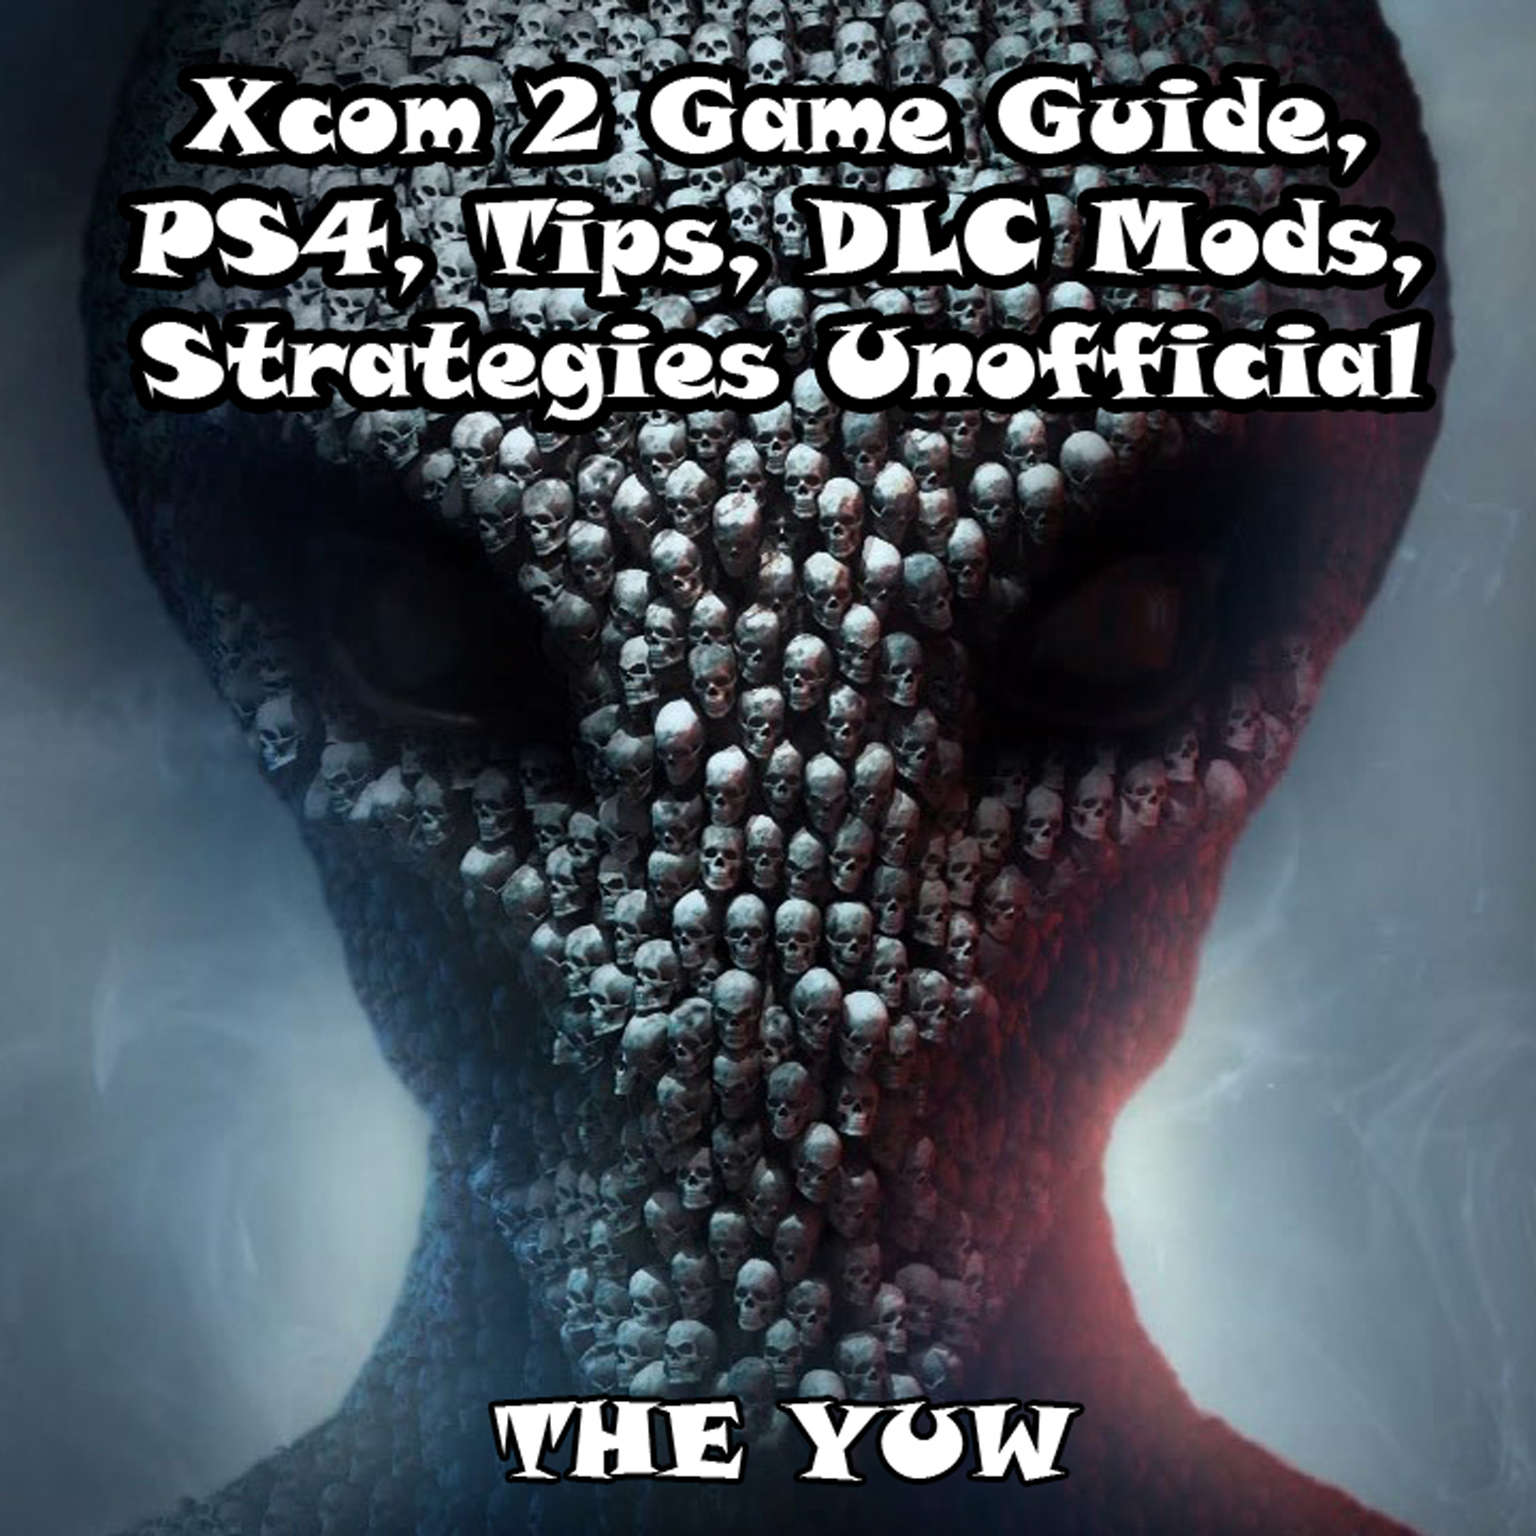 Xcom 2 Game Guide, PS4, Tips, DLC Mods, Strategies Unofficial Audiobook, by The Yuw